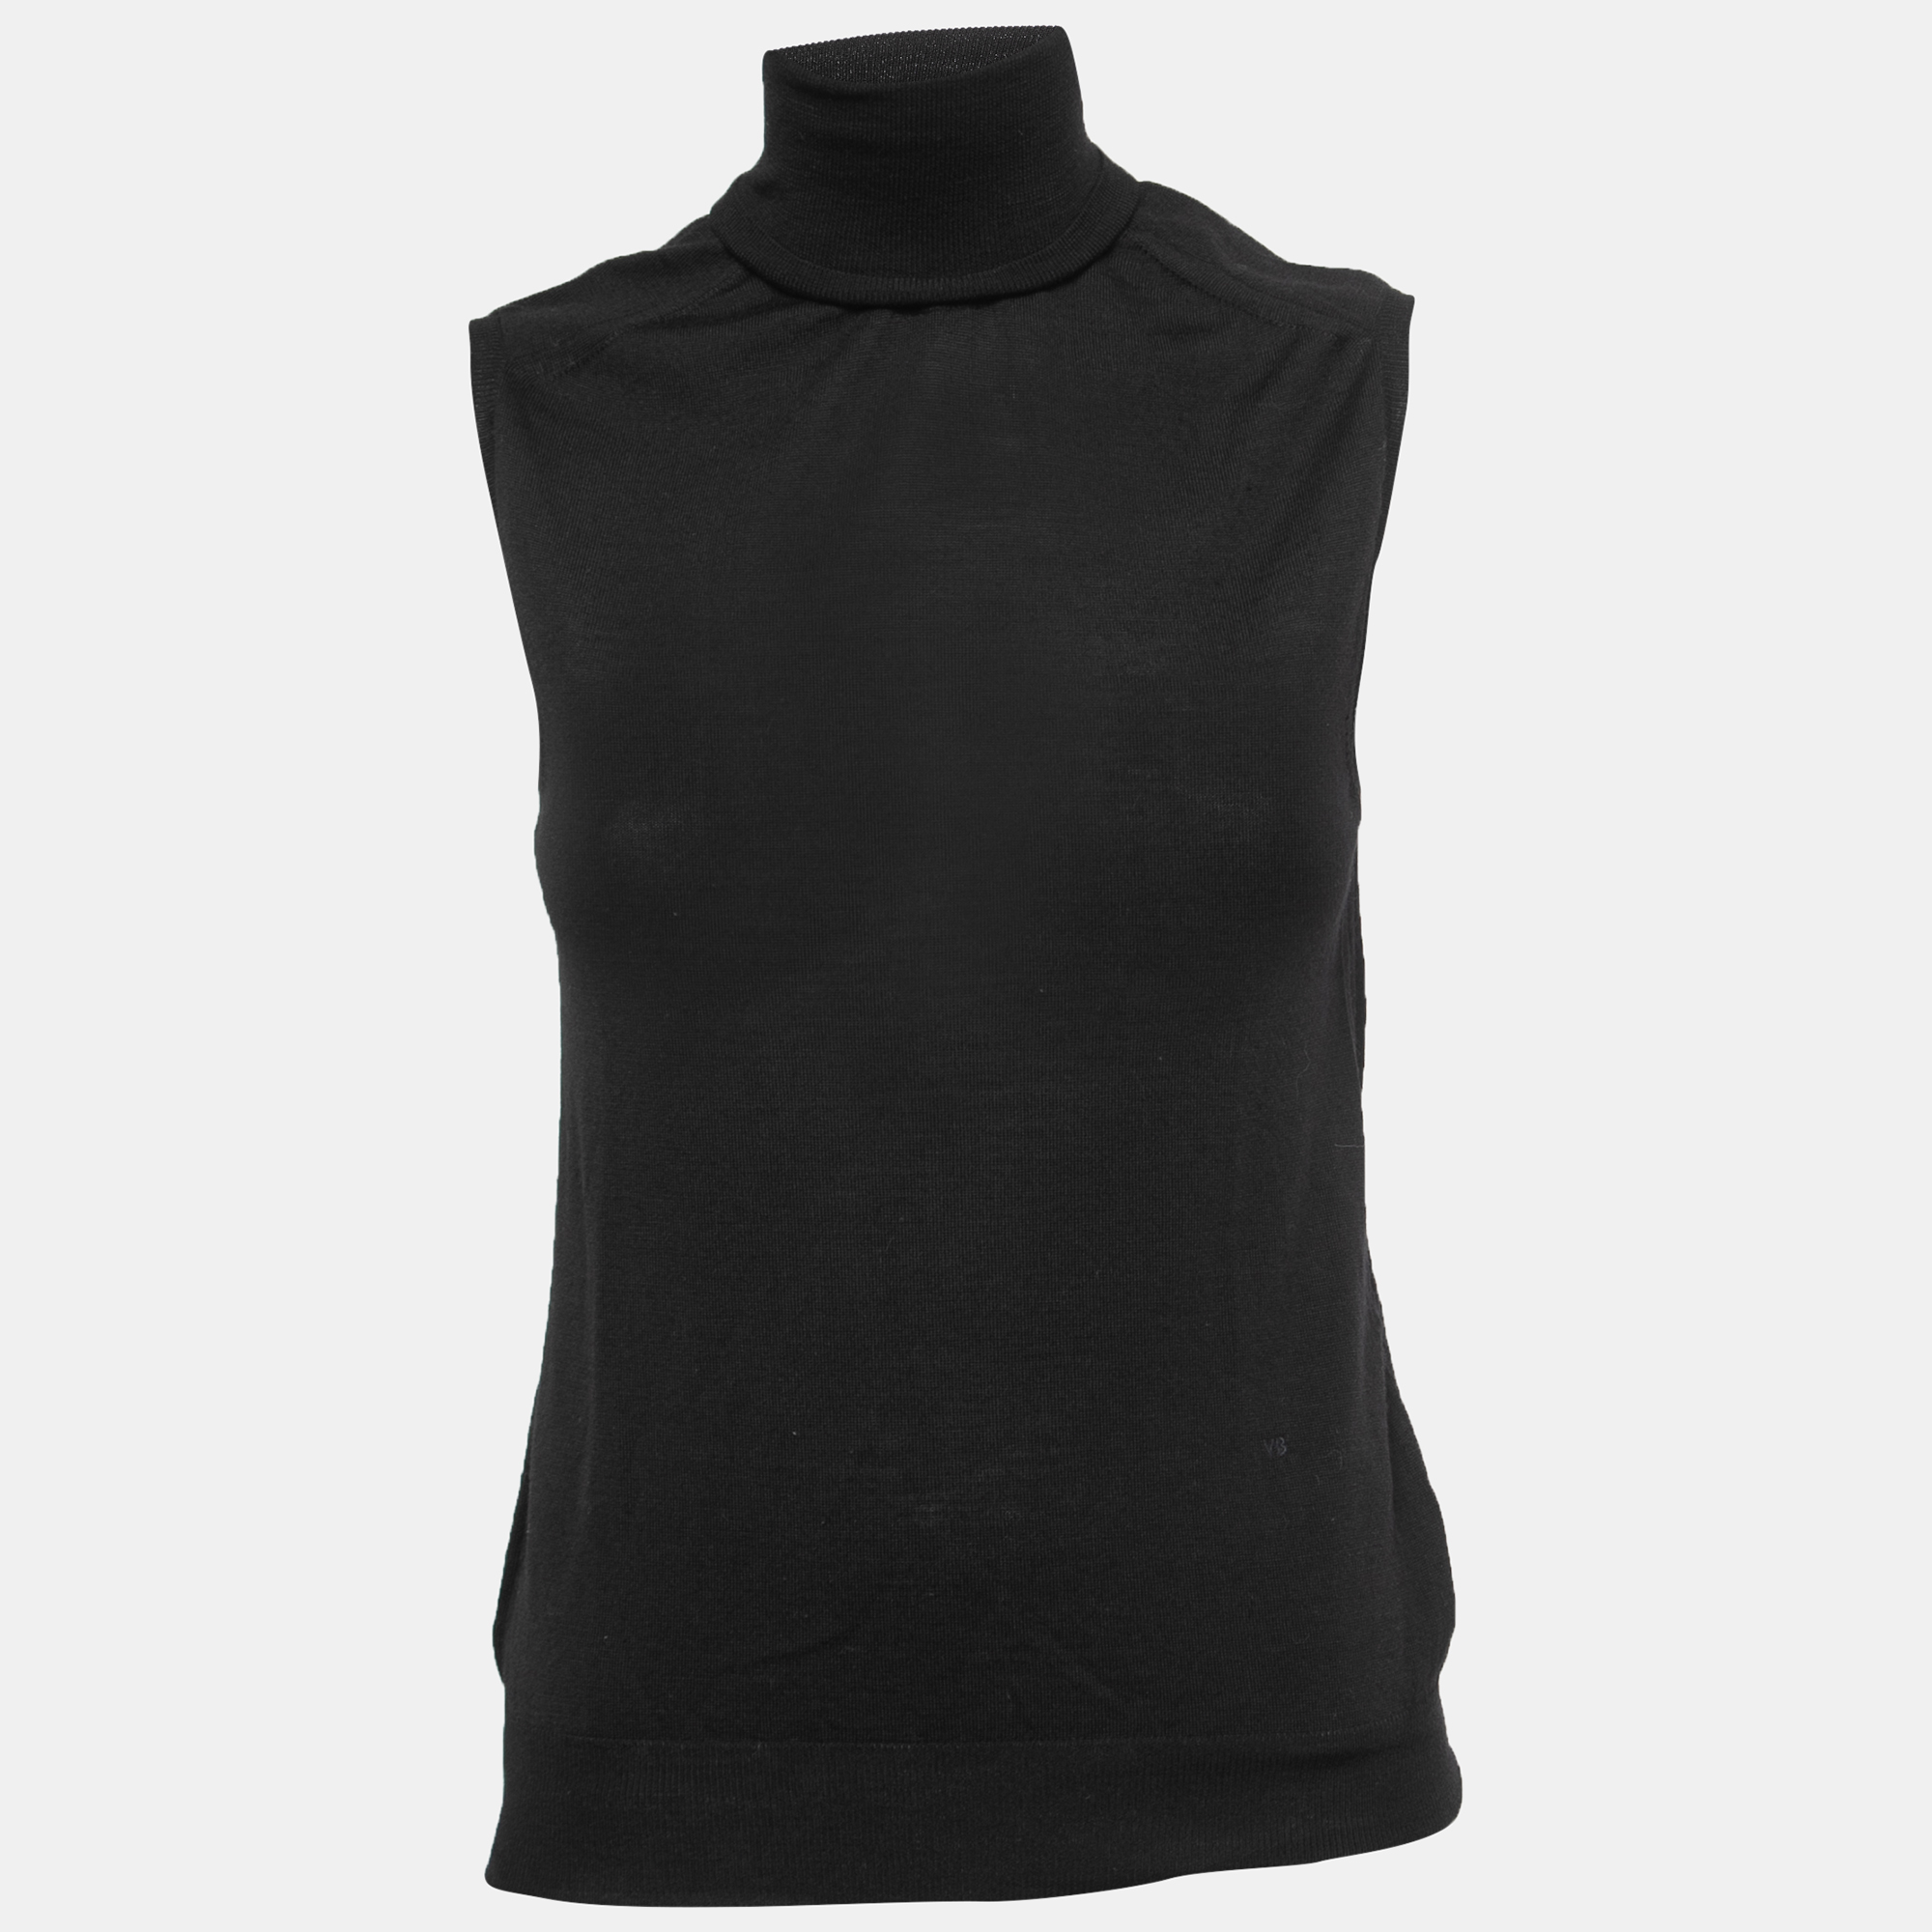 Pre-owned Victoria Beckham Black Wool Knit Turtleneck Sleeveless Top S